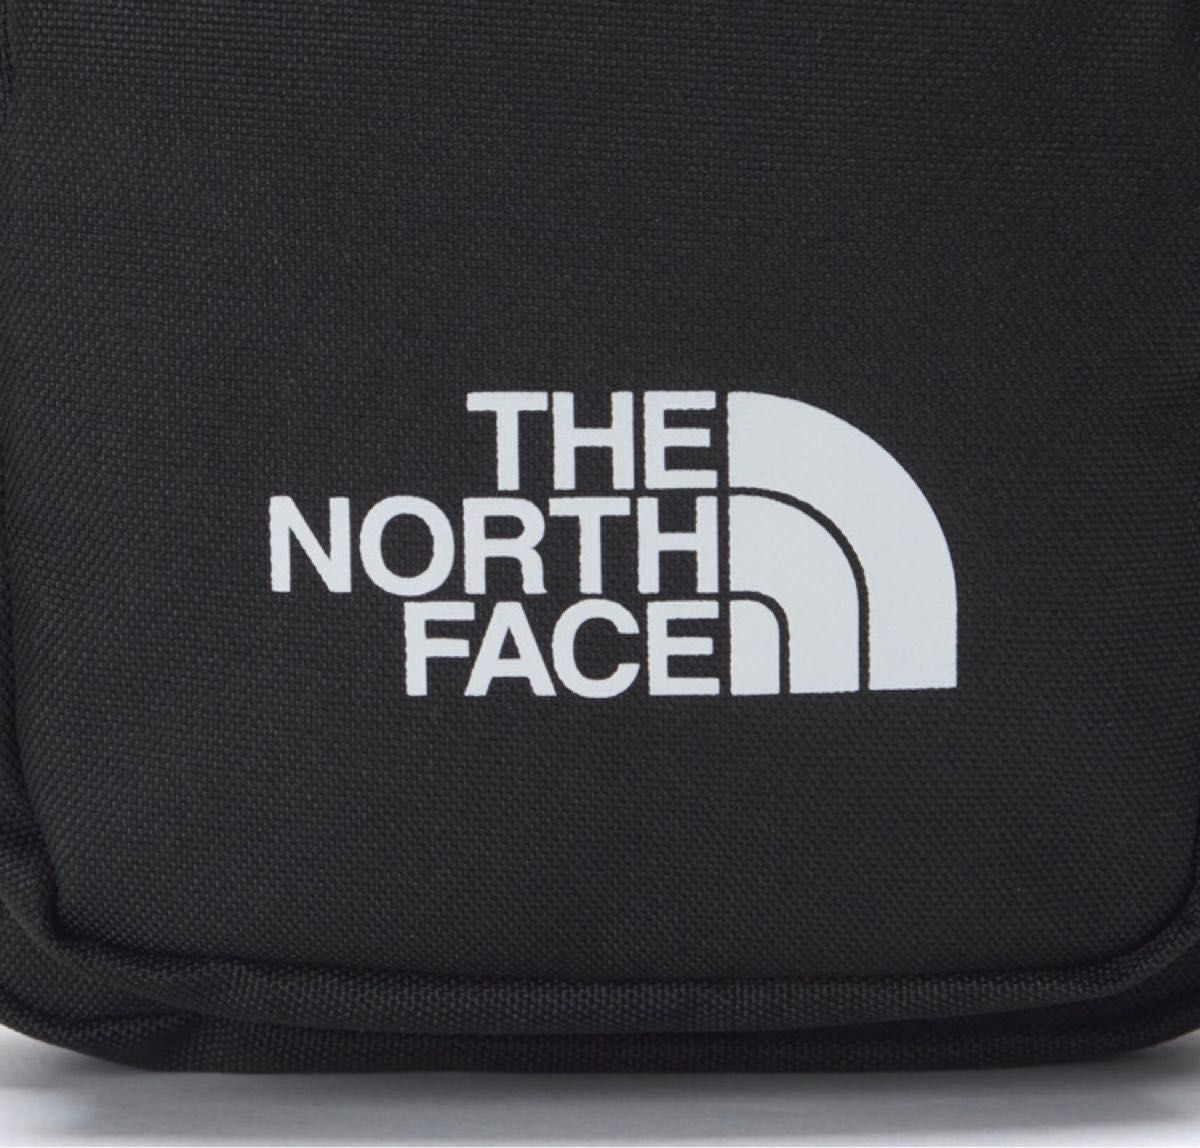 THE NORTH FACE WHITE LABEL NEW SIMPLE MINI BAG 2ウェイバッグ NN2PN53J